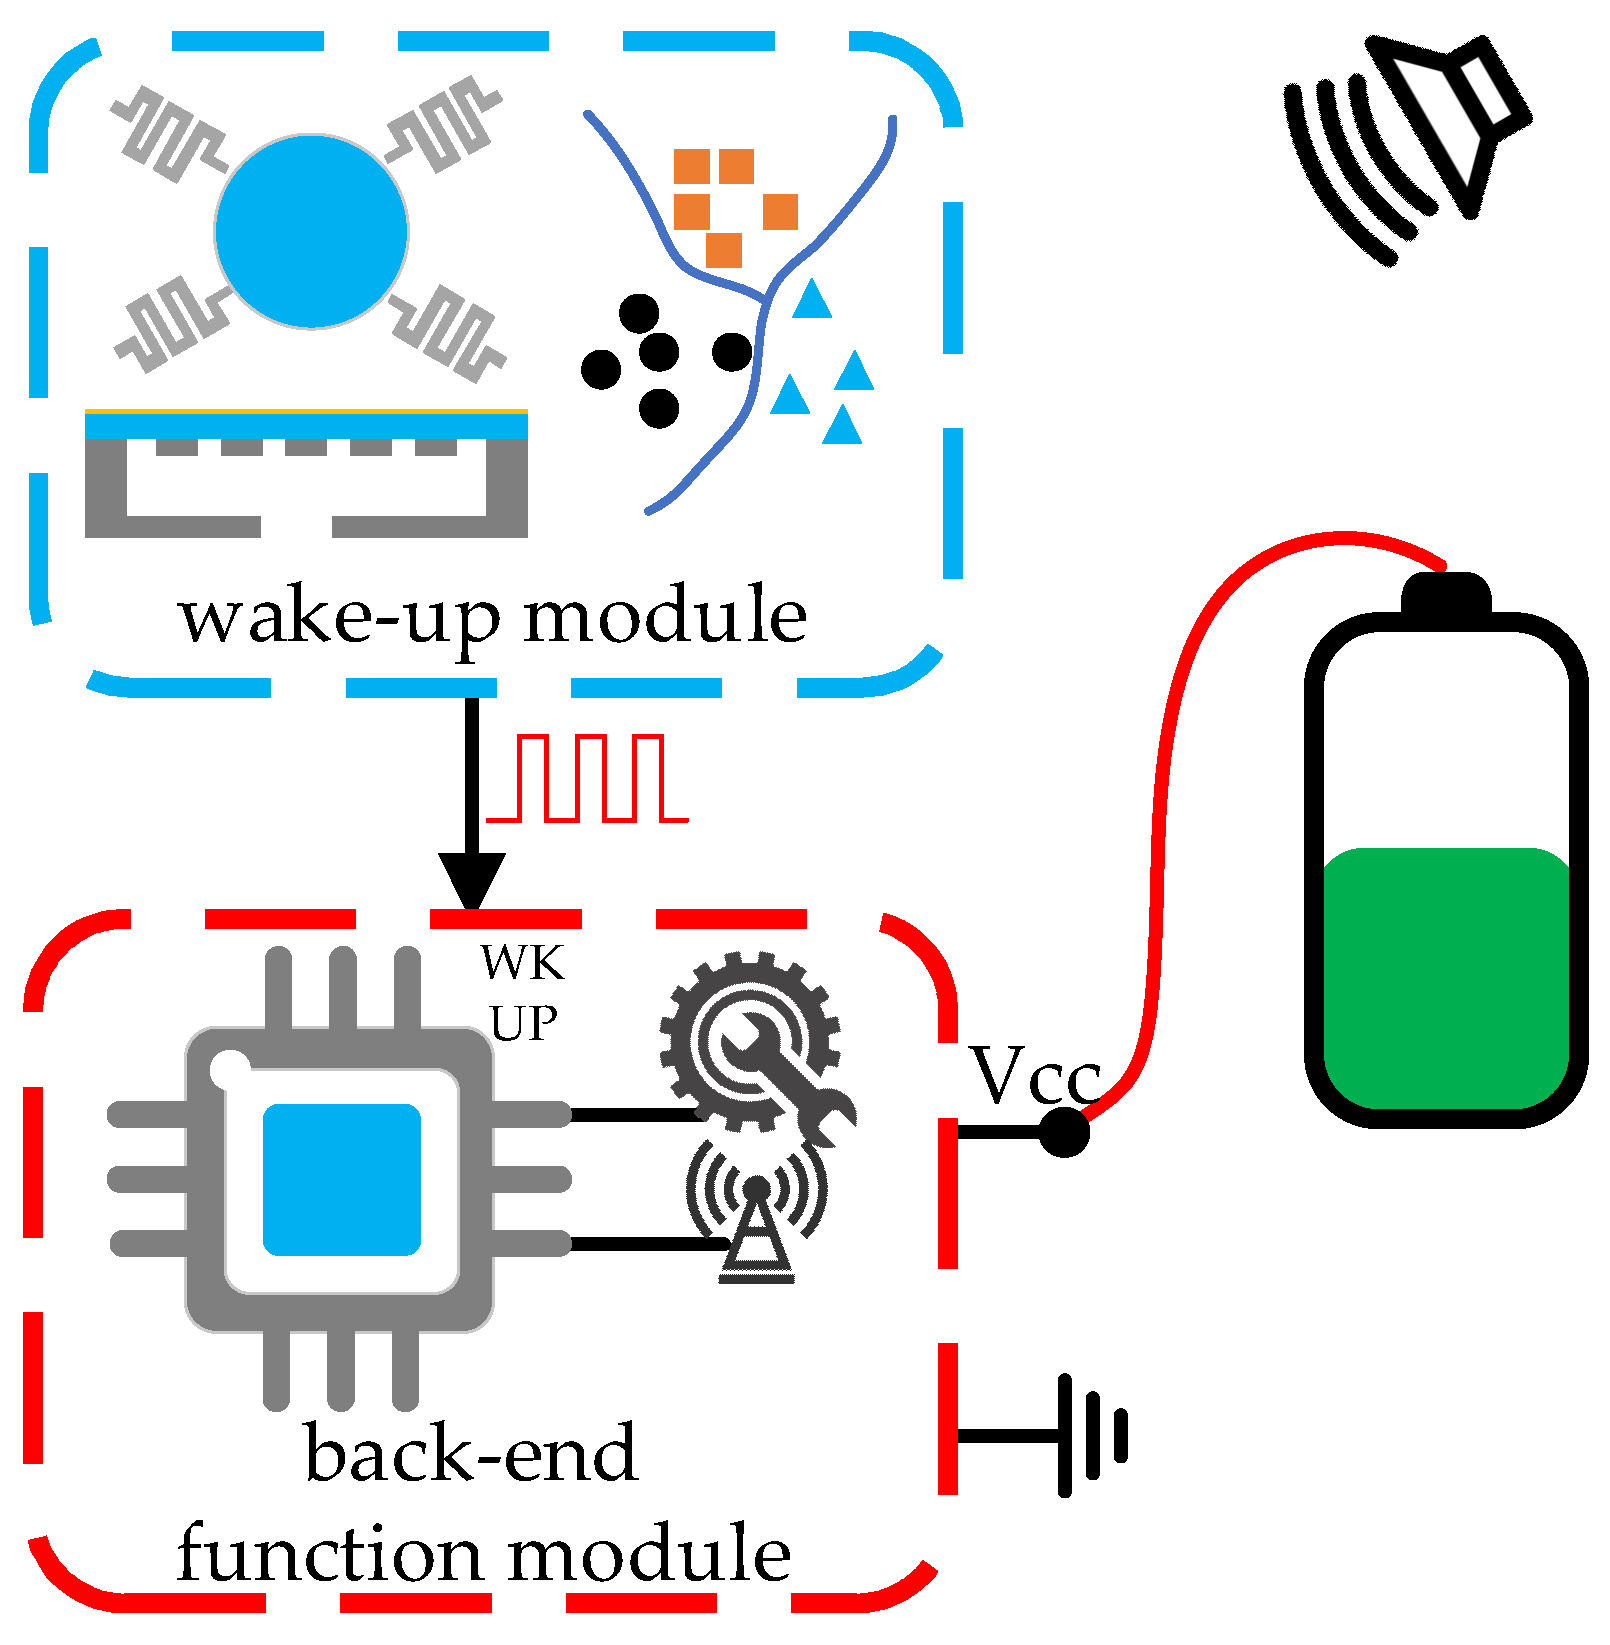 Architecture 2: zero-power recognition and low-power sleep